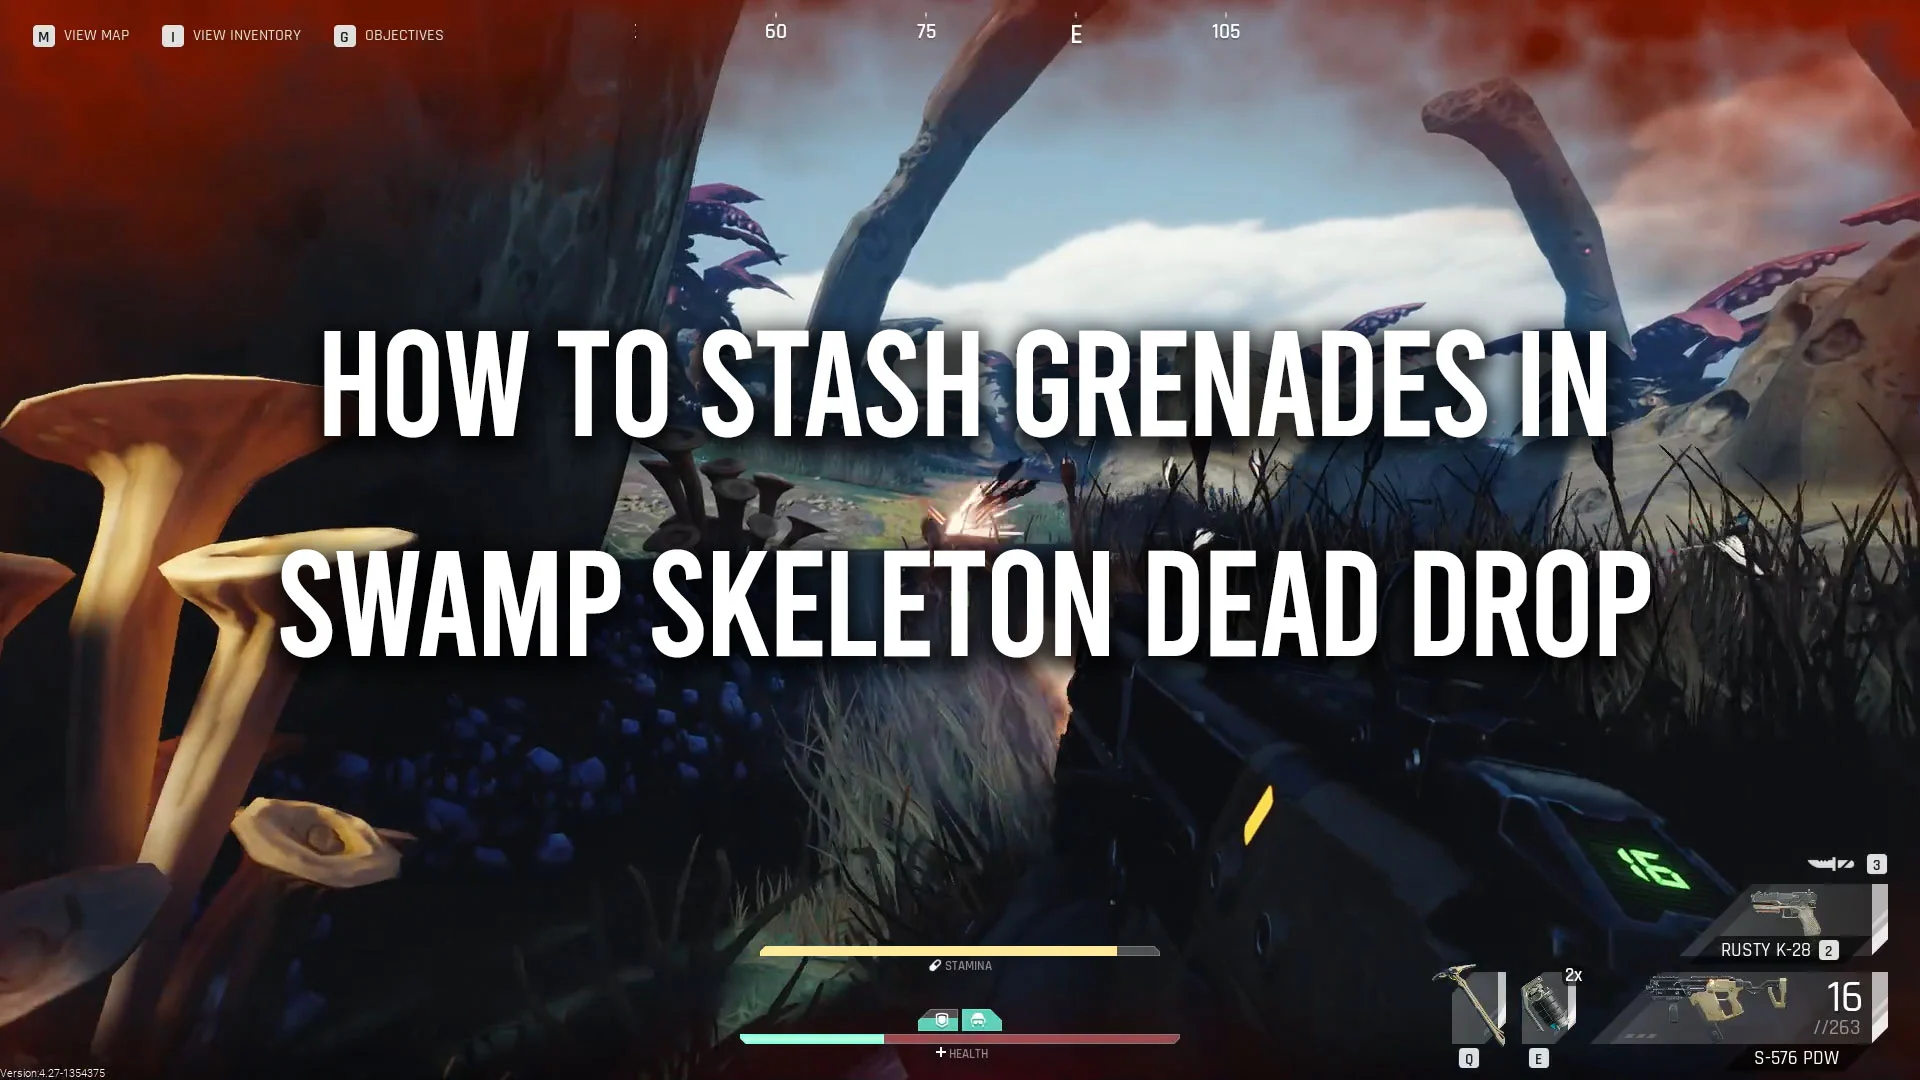 How to Stash Grenades in the Swamp Skeleton Dead Drop in The Cycle Frontier